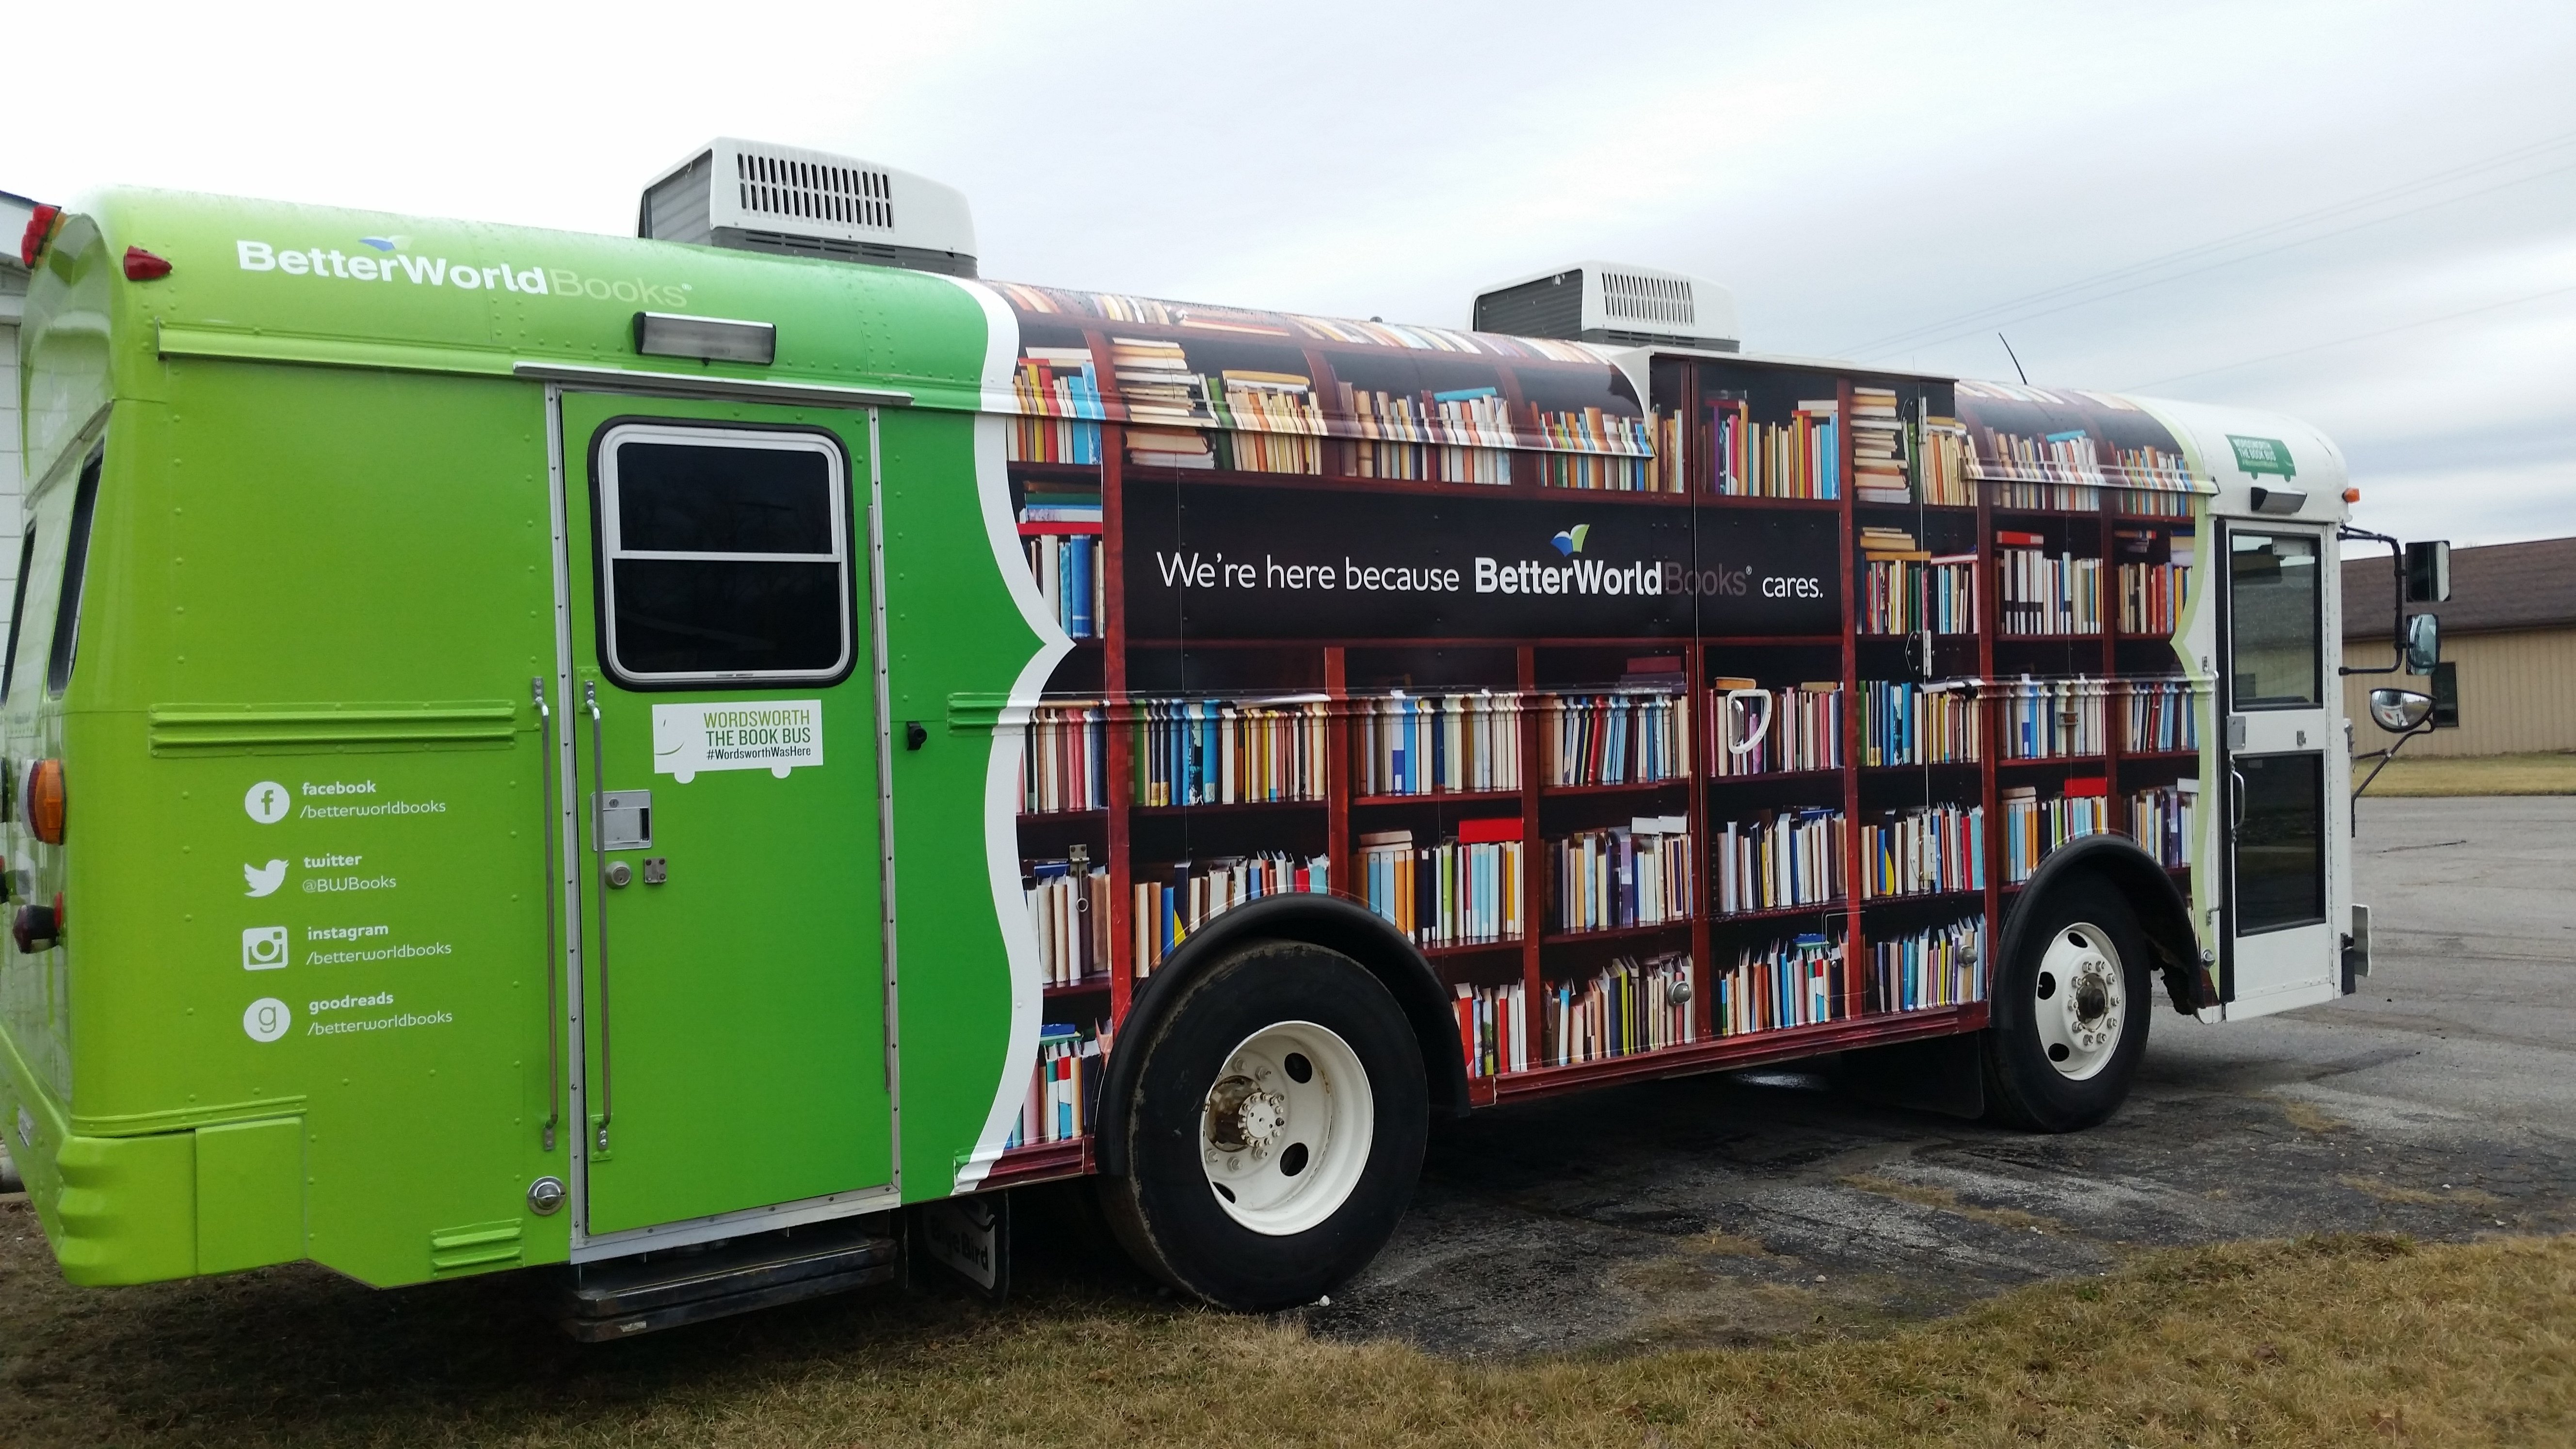 Press Release: “Wordsworth” the Book Bus Will Attend National Bookmobile Day